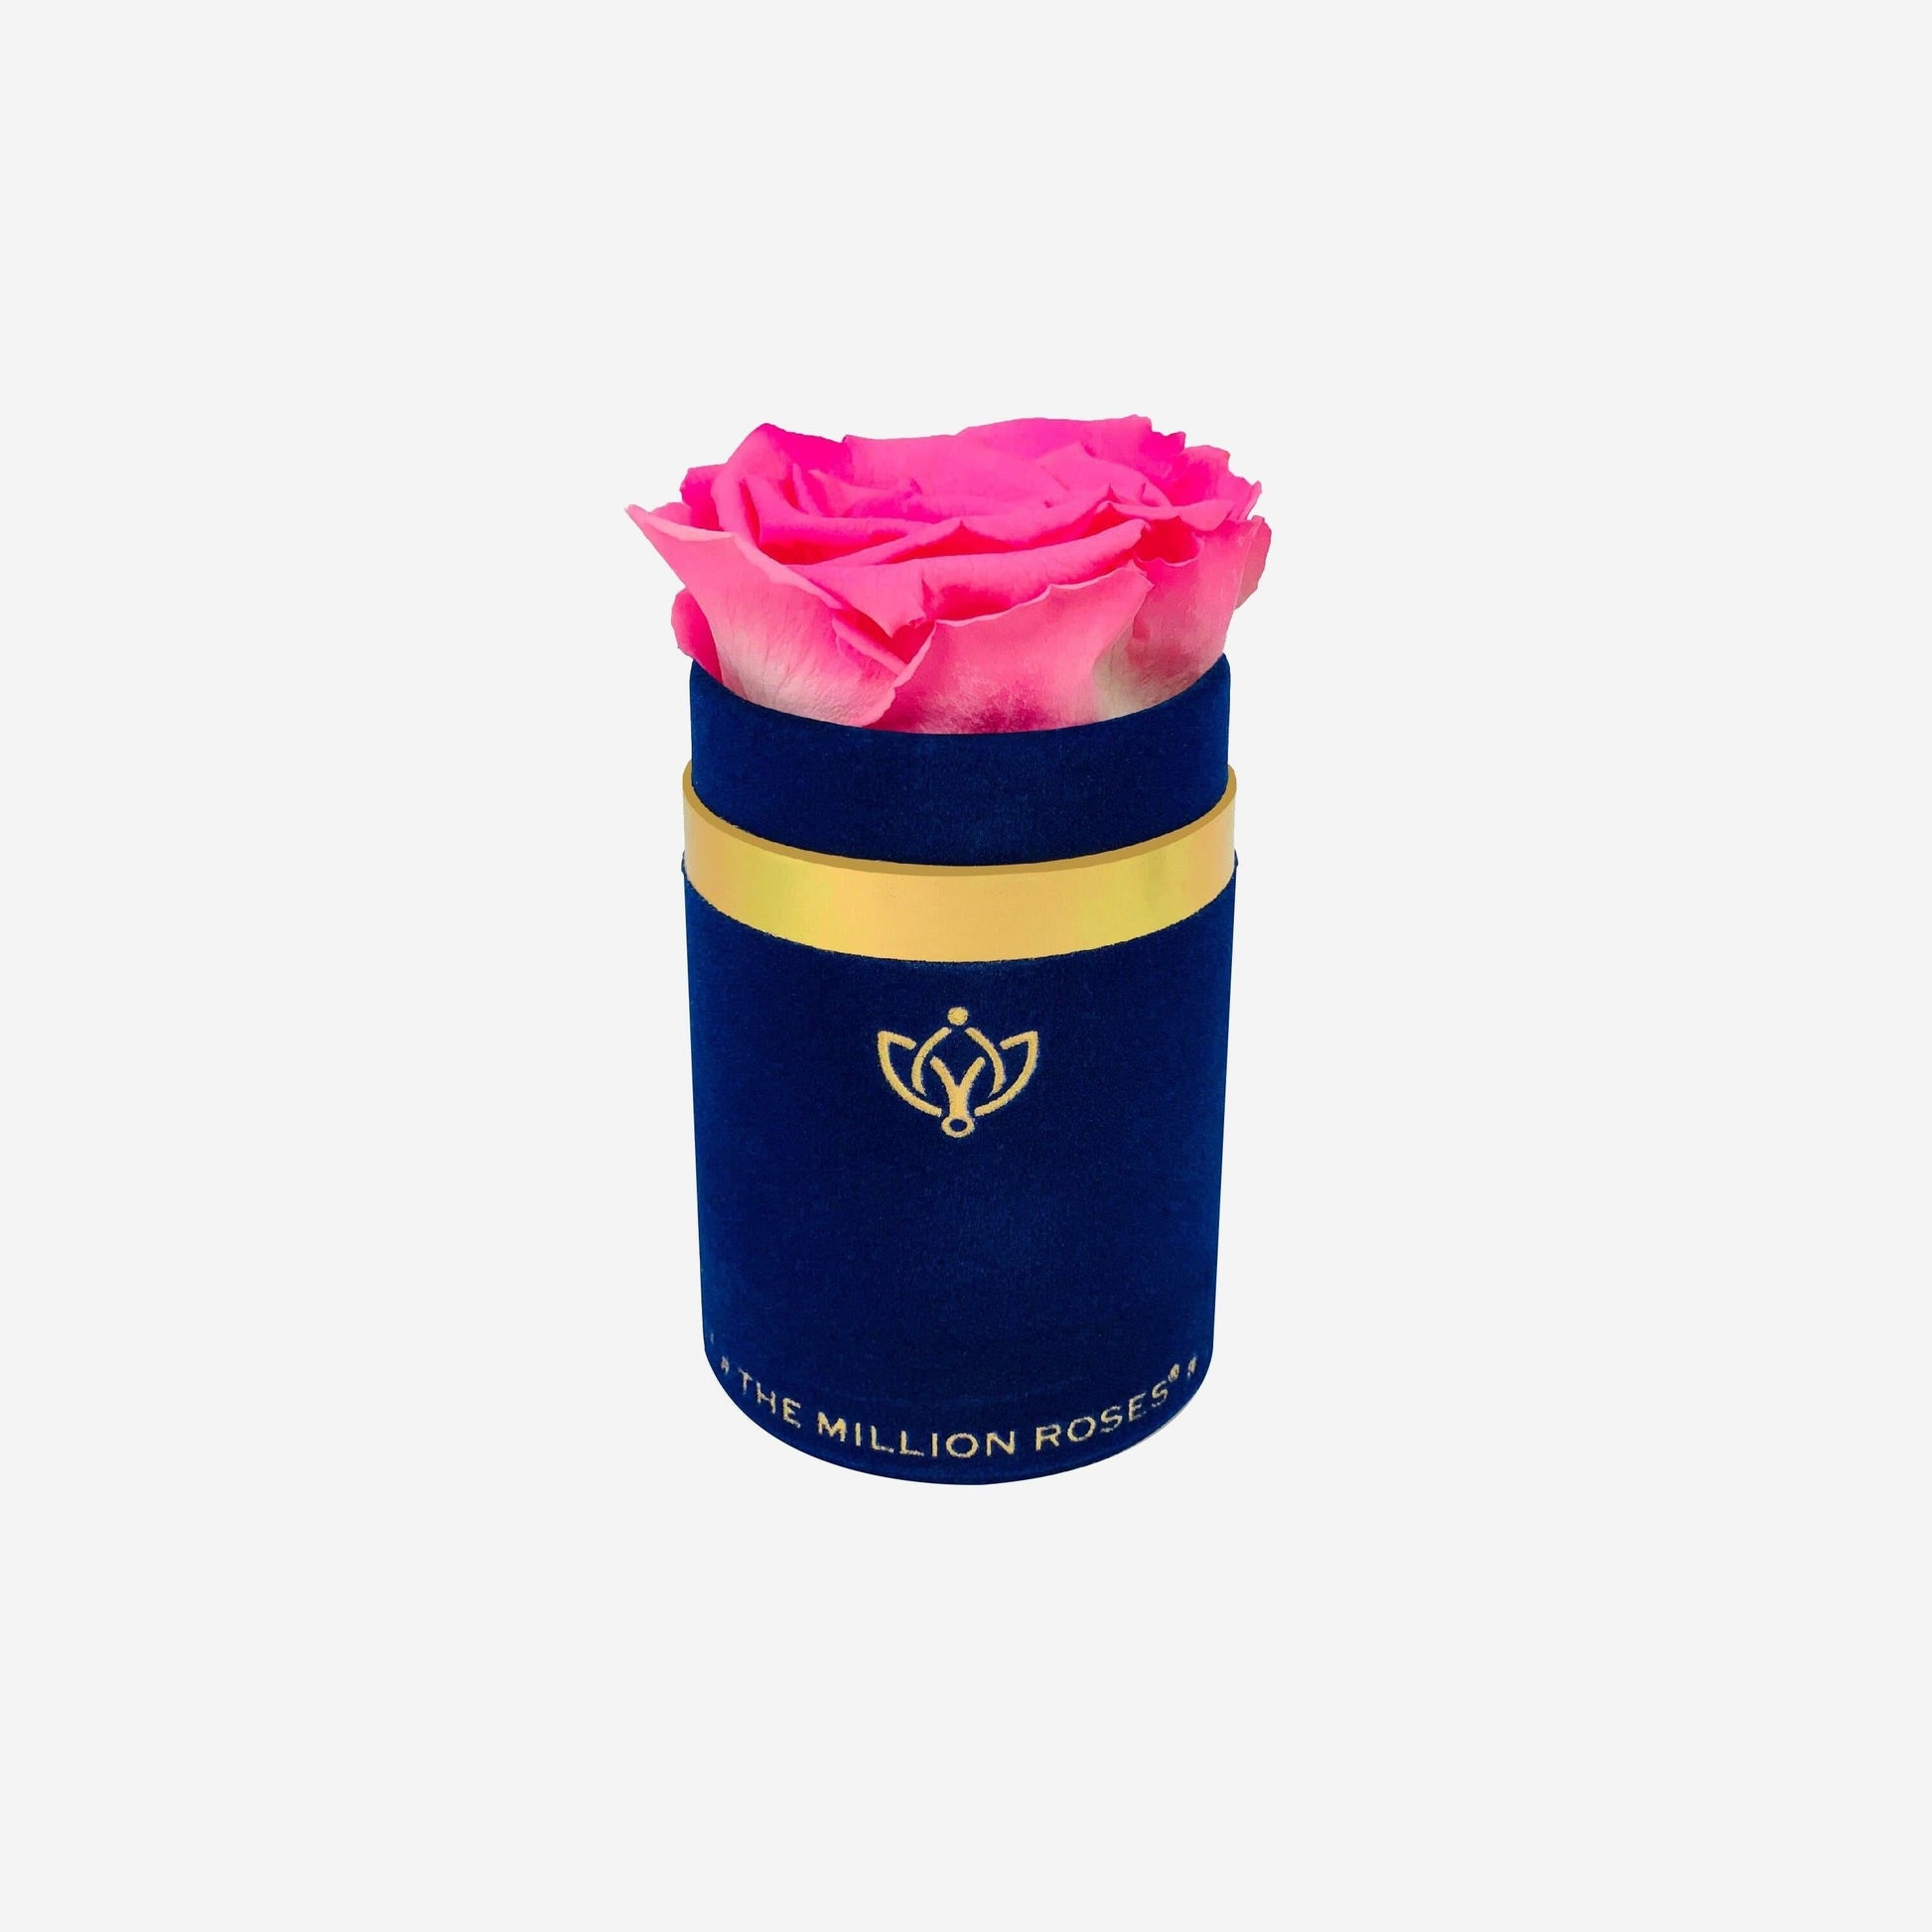 Single Royal Blue Suede Box | Candy Pink Rose - The Million Roses